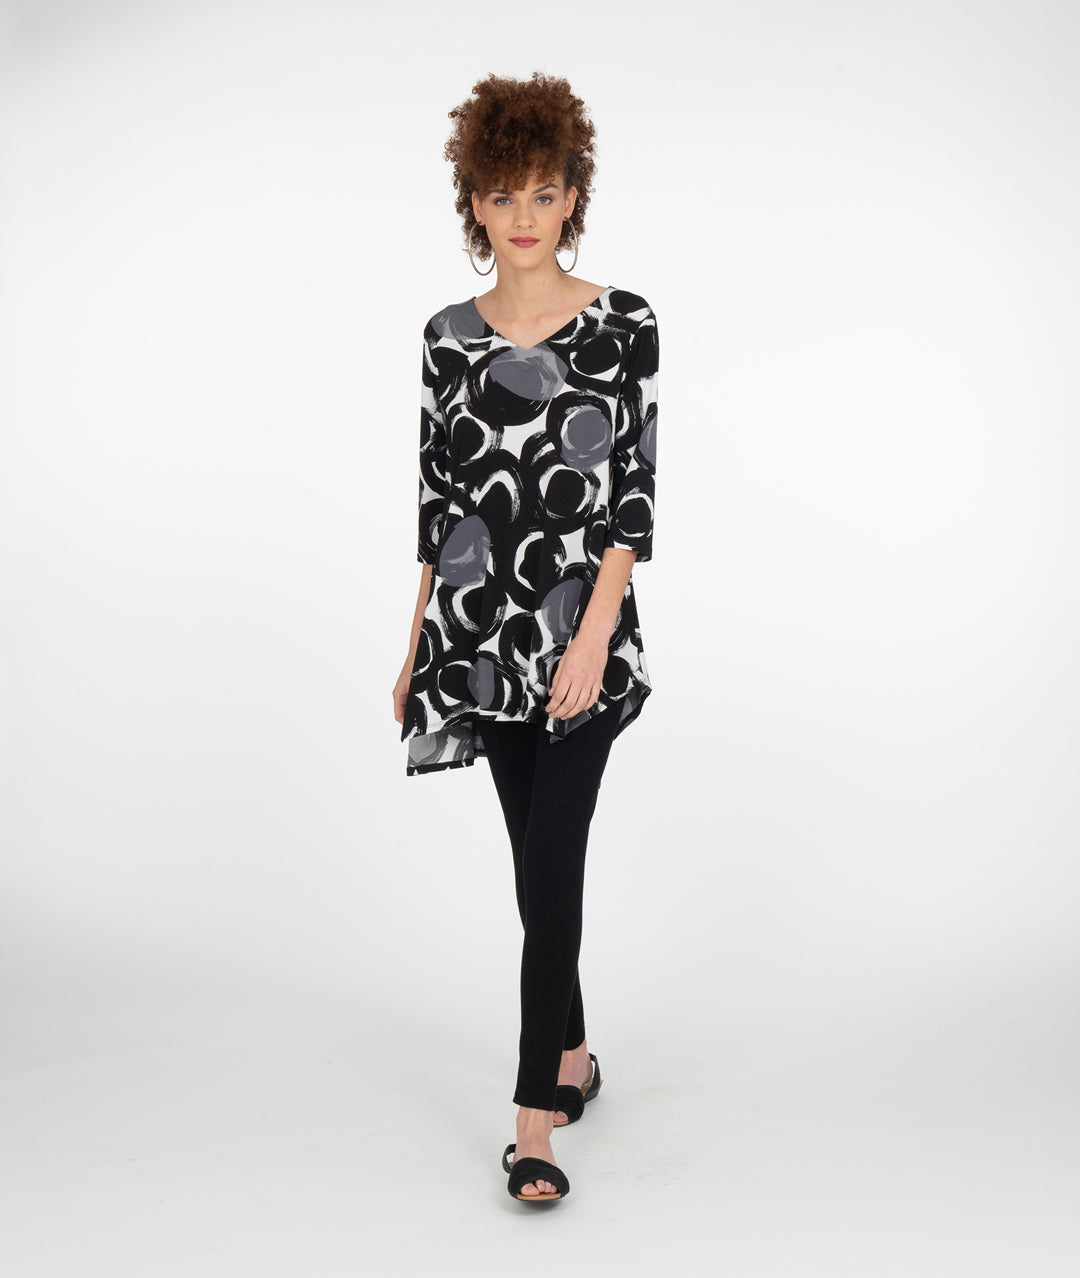 model in black leggings with a black, white and grey circle print tunic with a high-low hem and a vneck